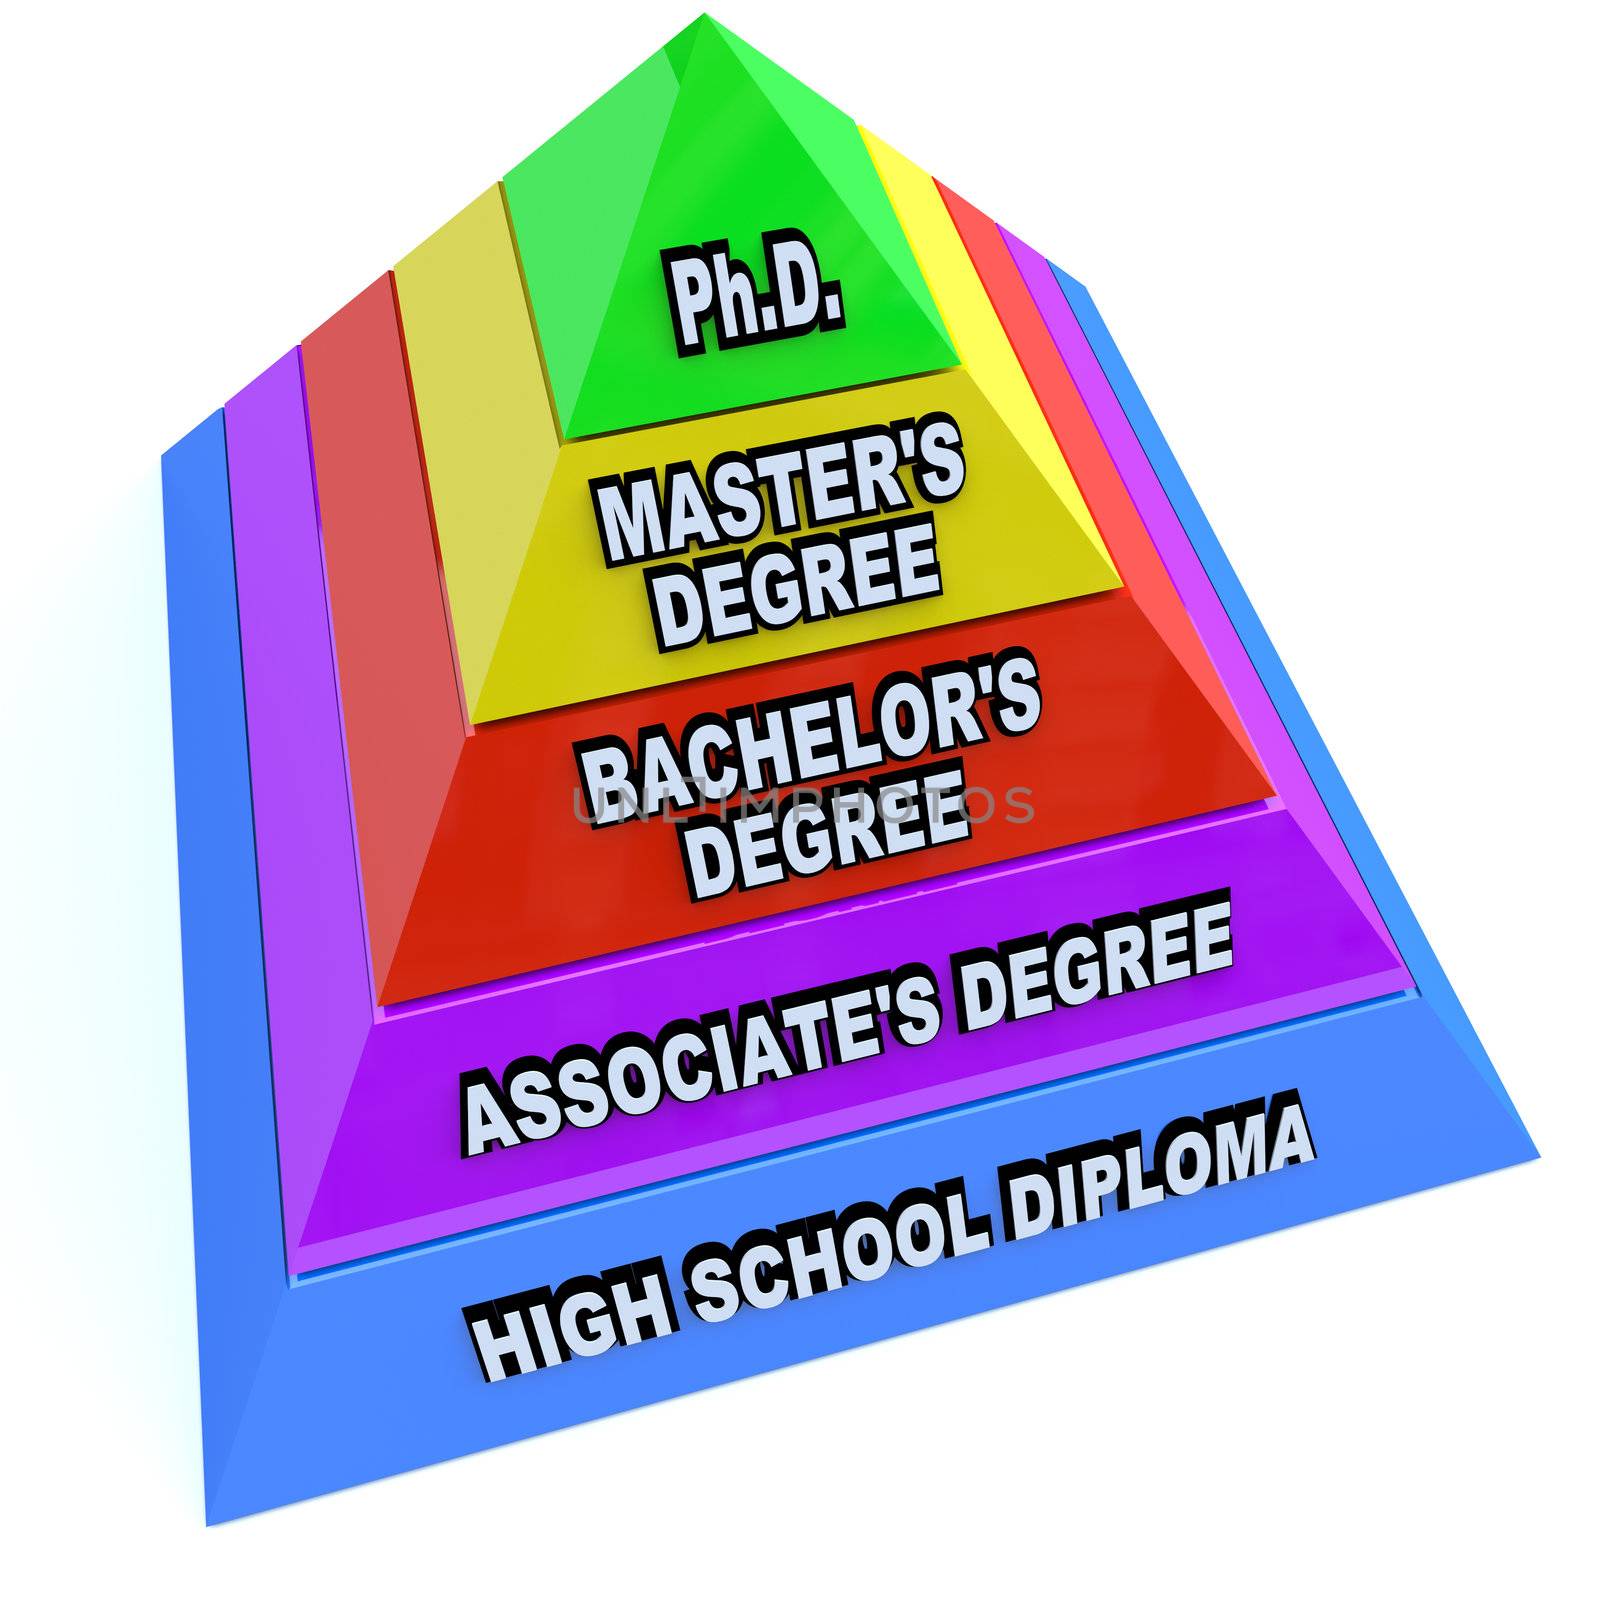 A pyramid depicting the levels of higher education -- starting with high school diploma, then associate's degree, bachelor's degree, master's degree, and Ph.D